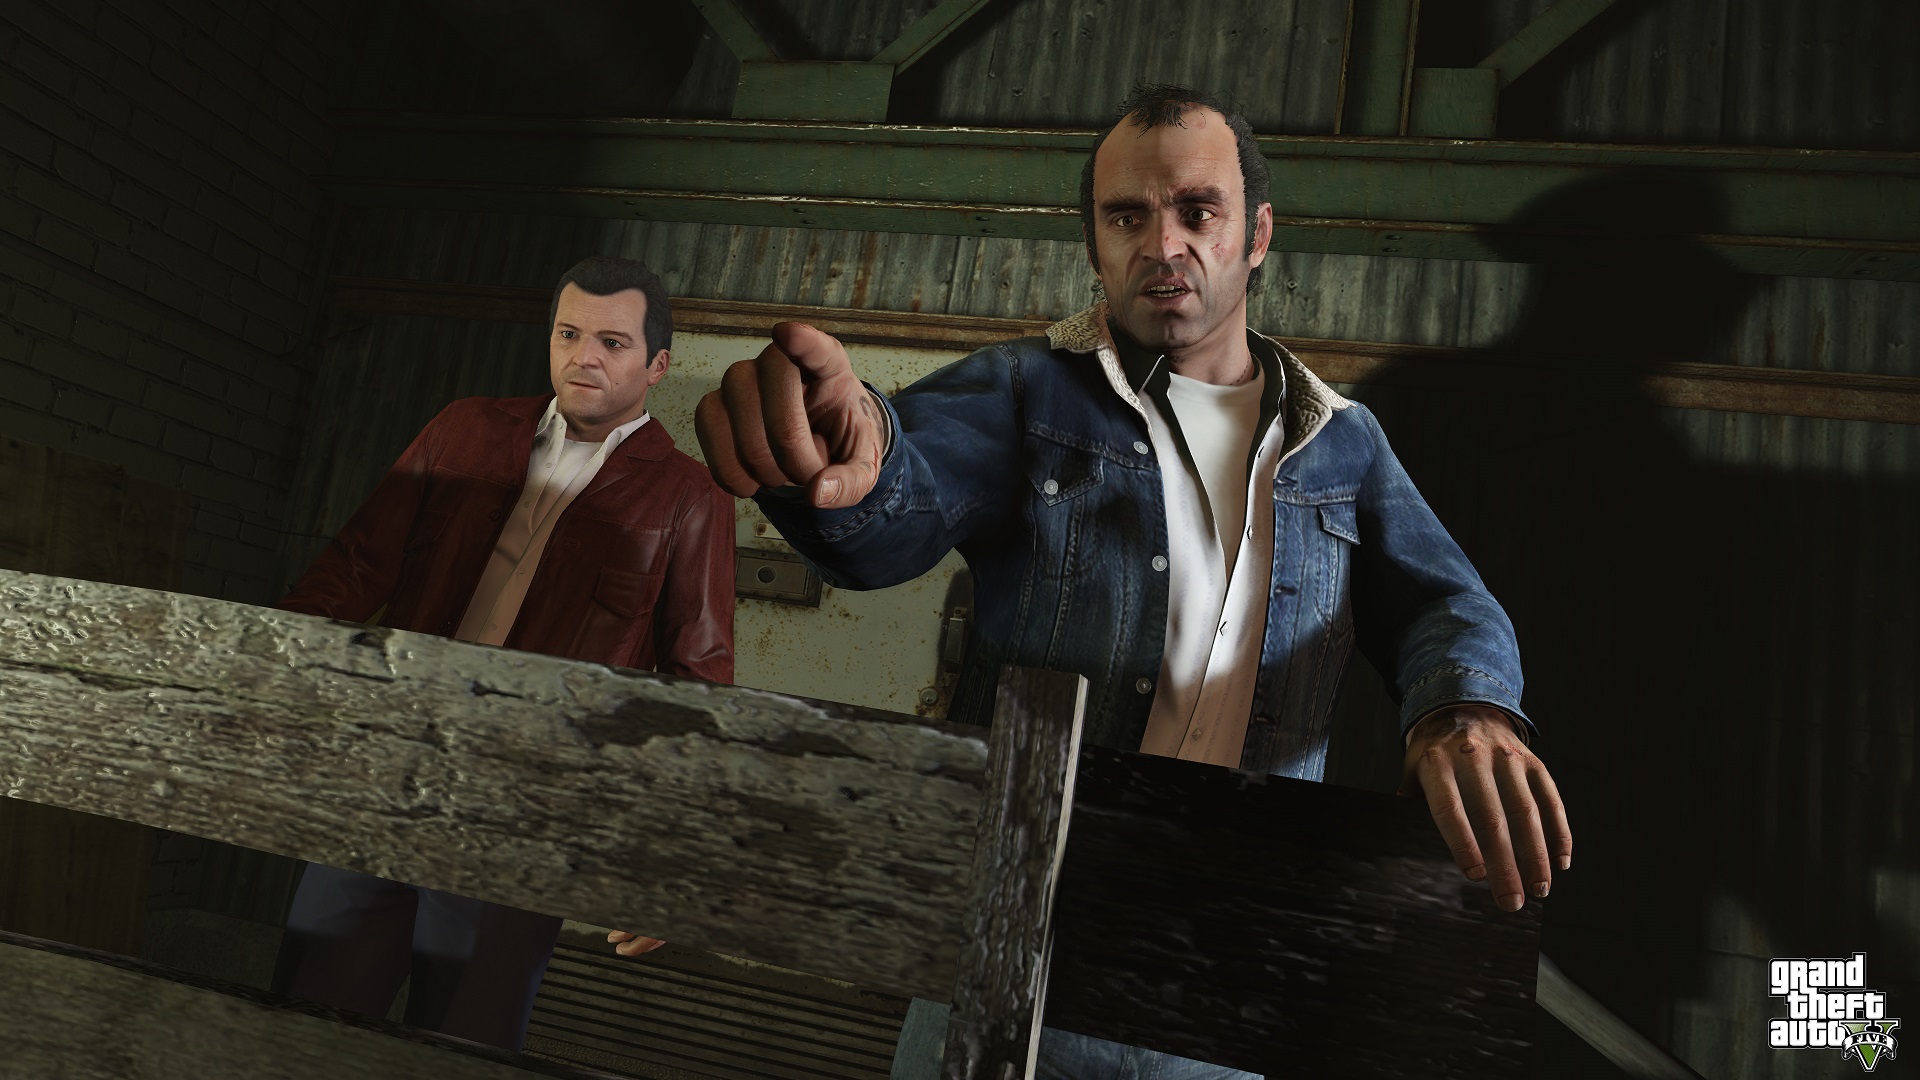 Grand Theft Auto V Now the Most Profitable Entertainment Product Ever